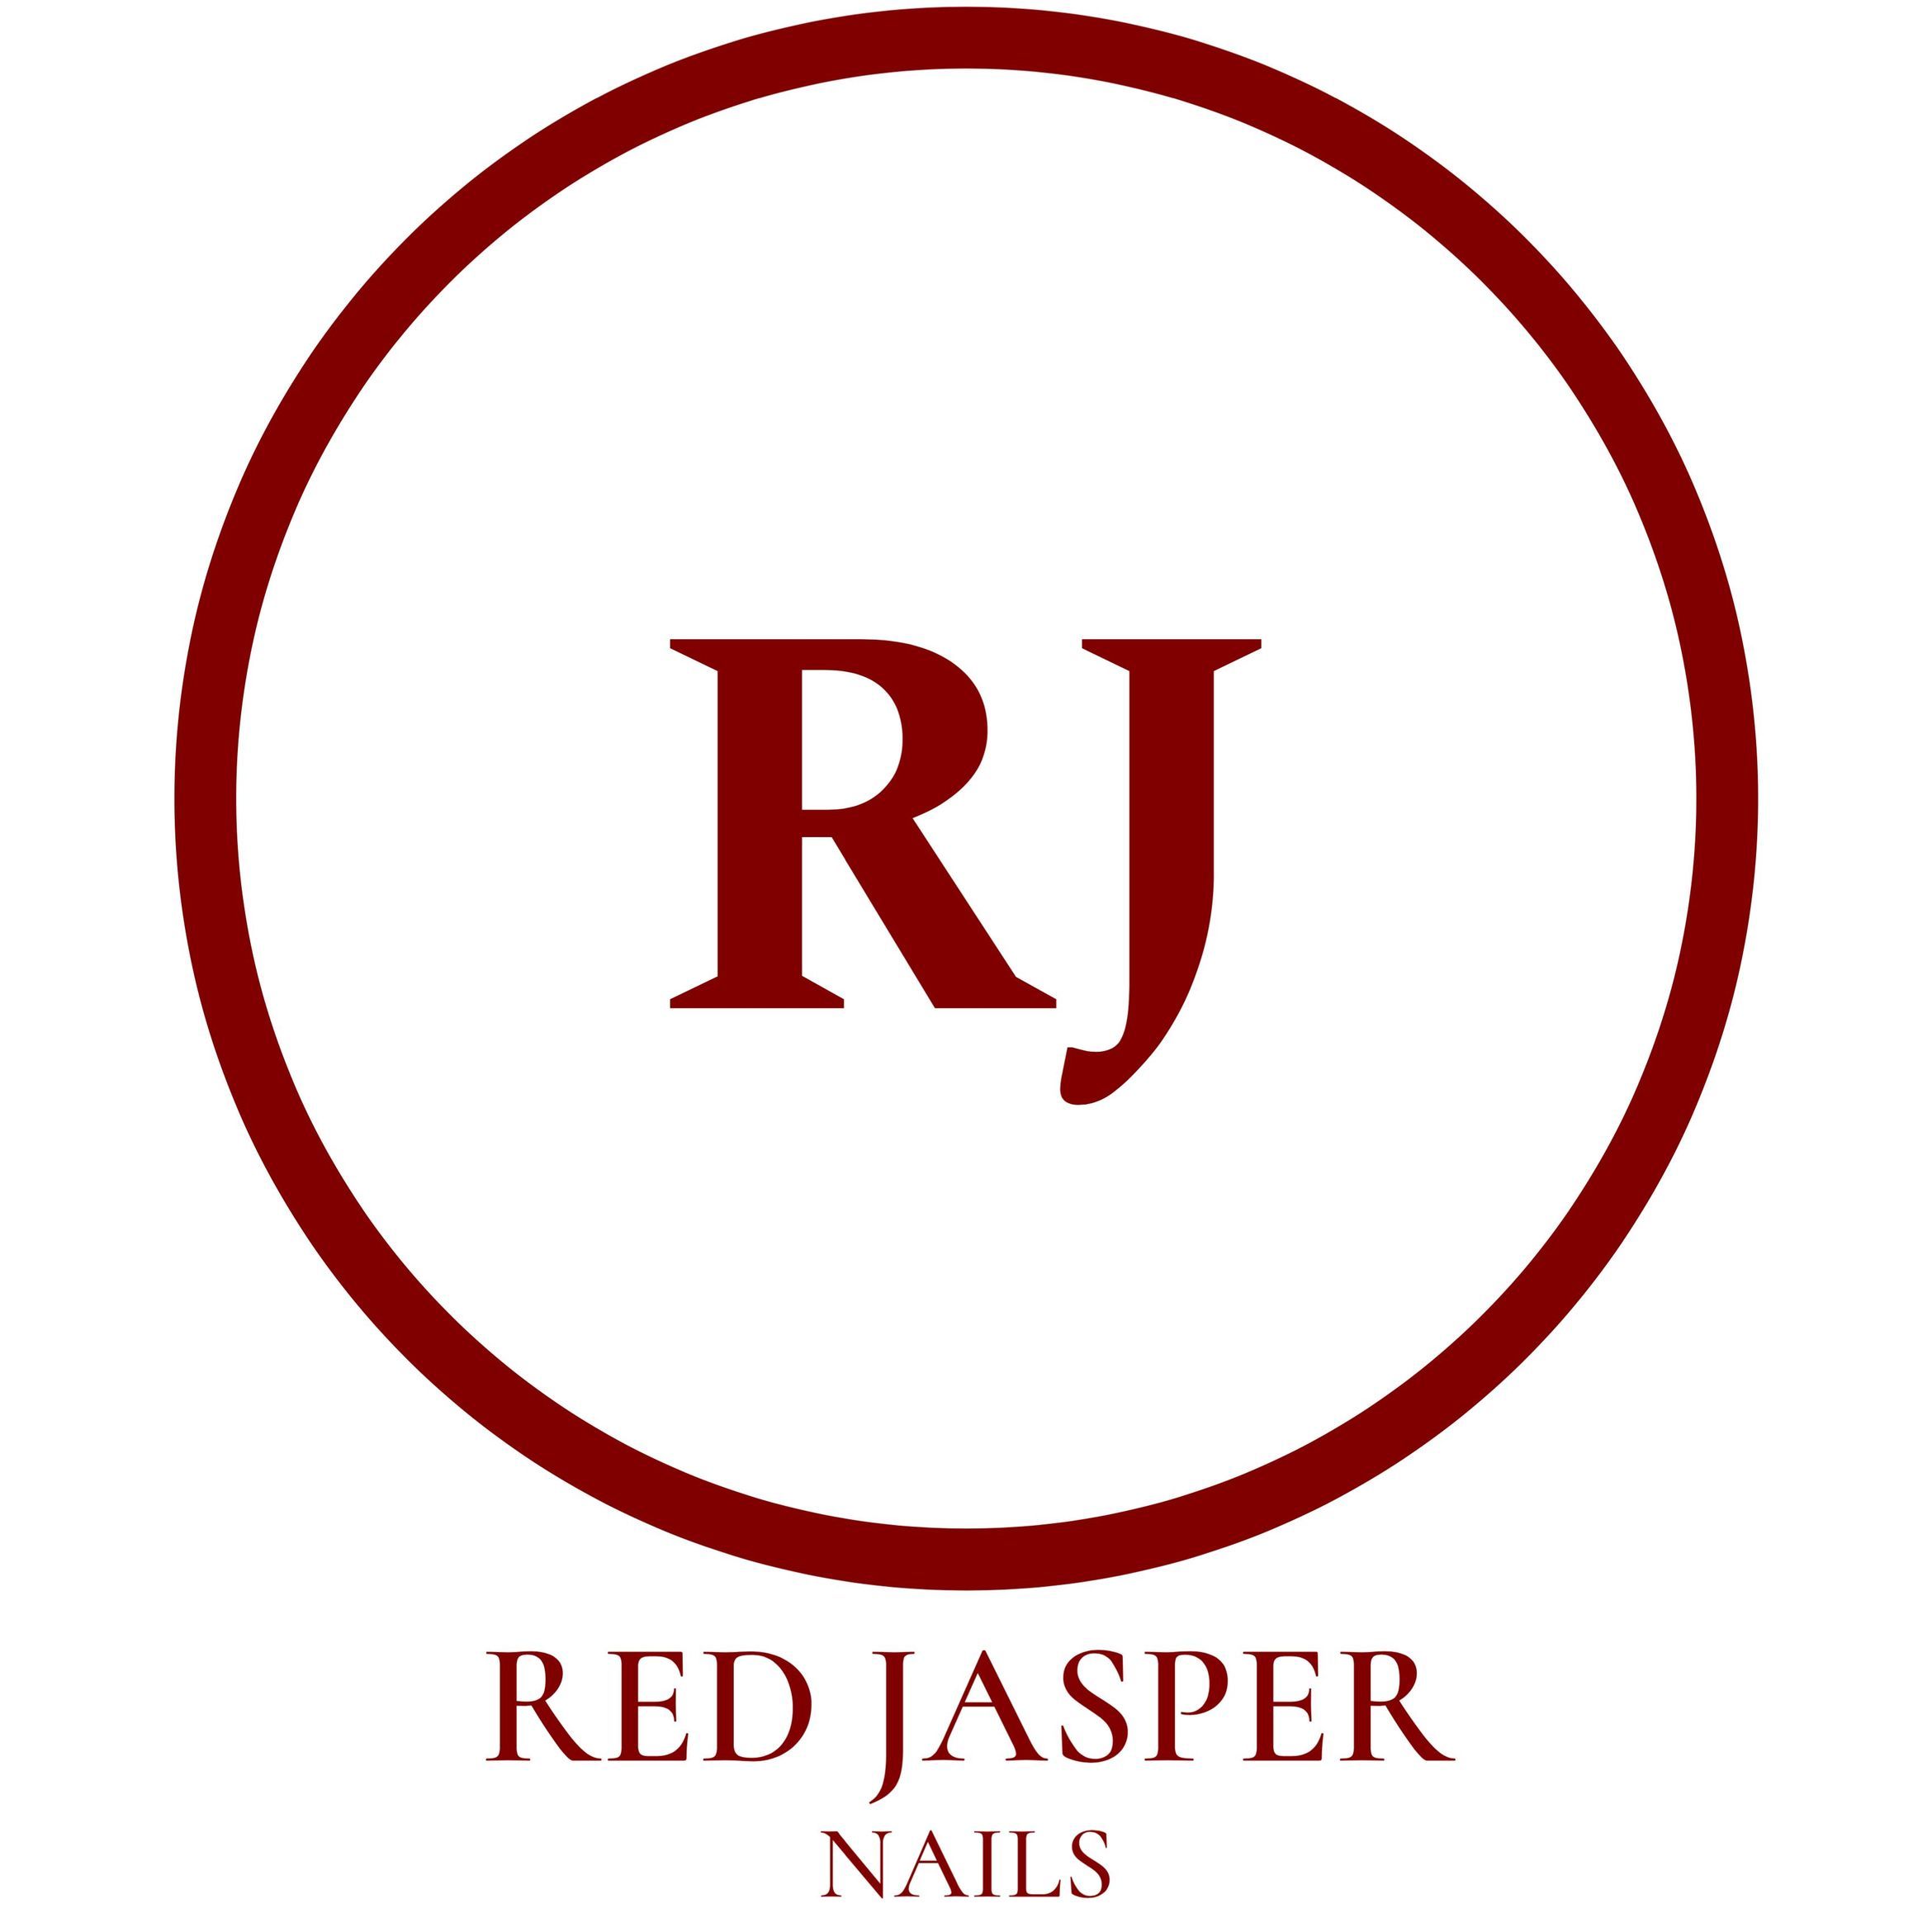 Red Jasper Nails, 2523 N Lincoln Ave, Chicago, 60614